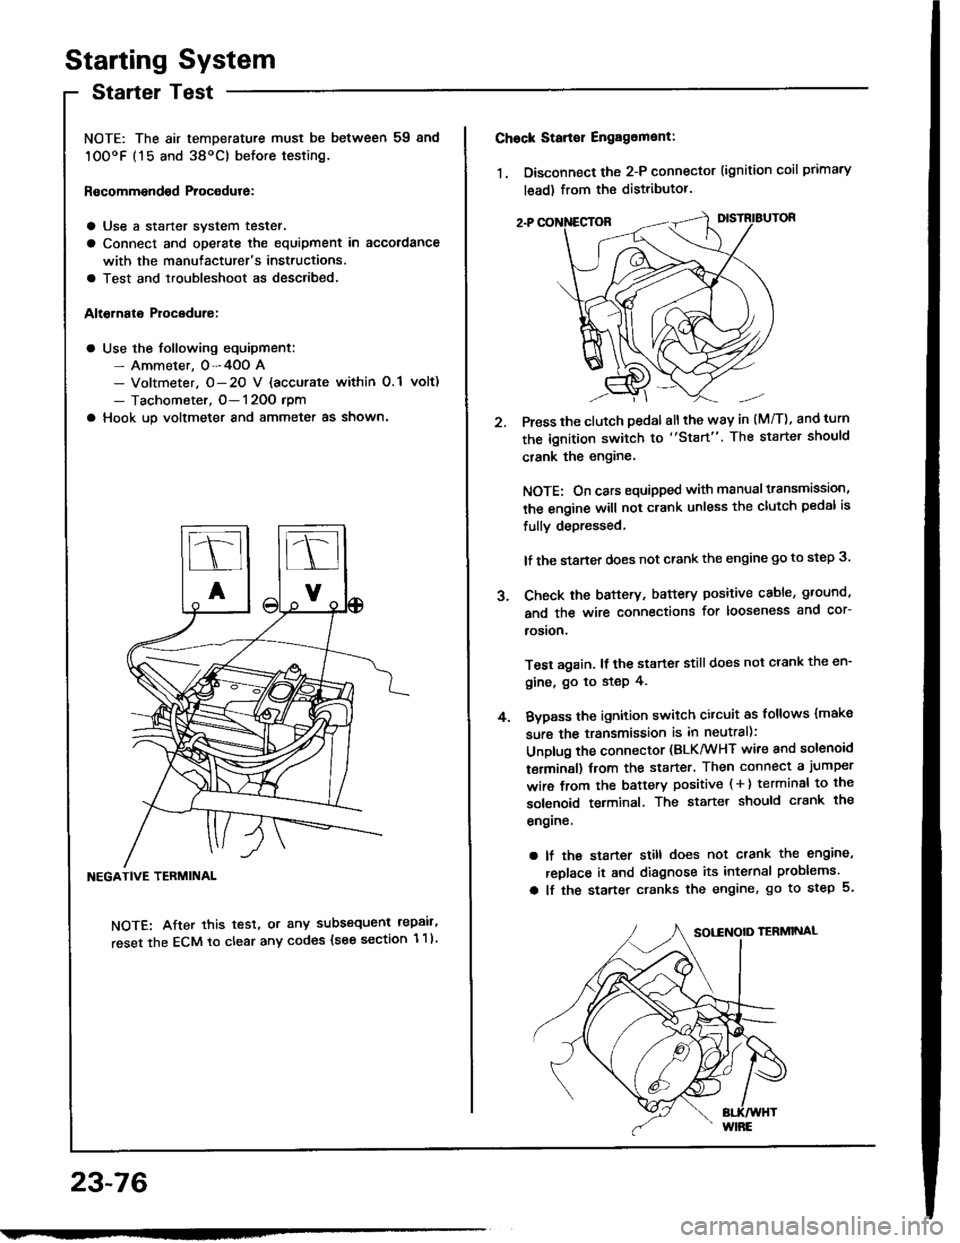 HONDA INTEGRA 1994 4.G User Guide Starting System
Startel Test
NOTE: The air temDerature must be between 59 8nd
10OoF (15 and 38oC) before testing.
Recommendsd Procodure:
a Use a staner svstem tester.
a Connect and operate the equipme